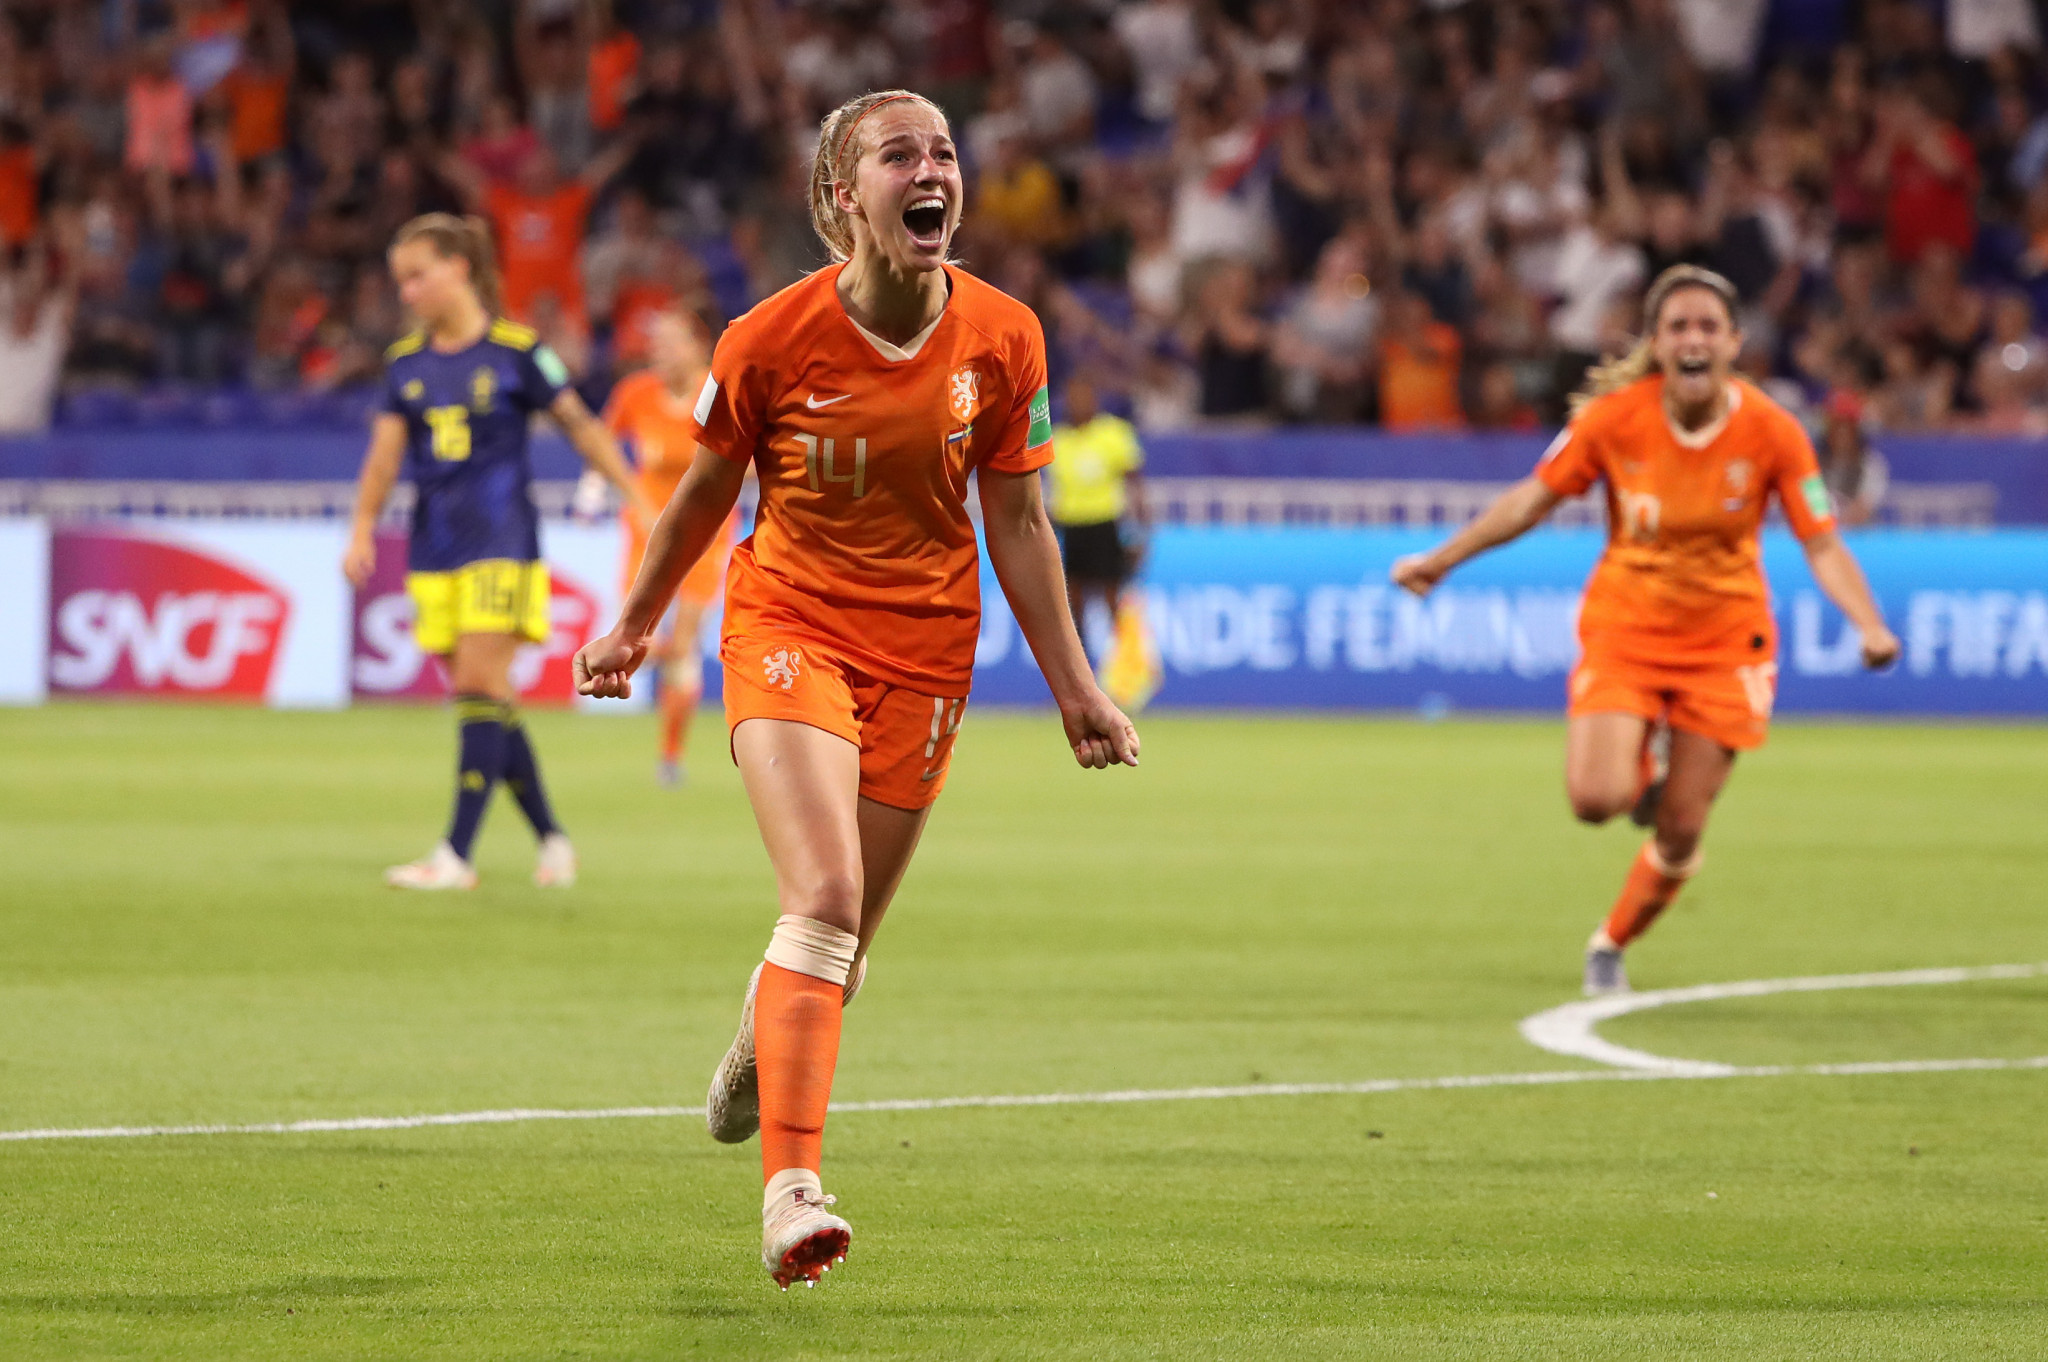 Jackie Groenen scored the only goal of the game as the Netherlands reached the Women's World Cup final ©Getty Images